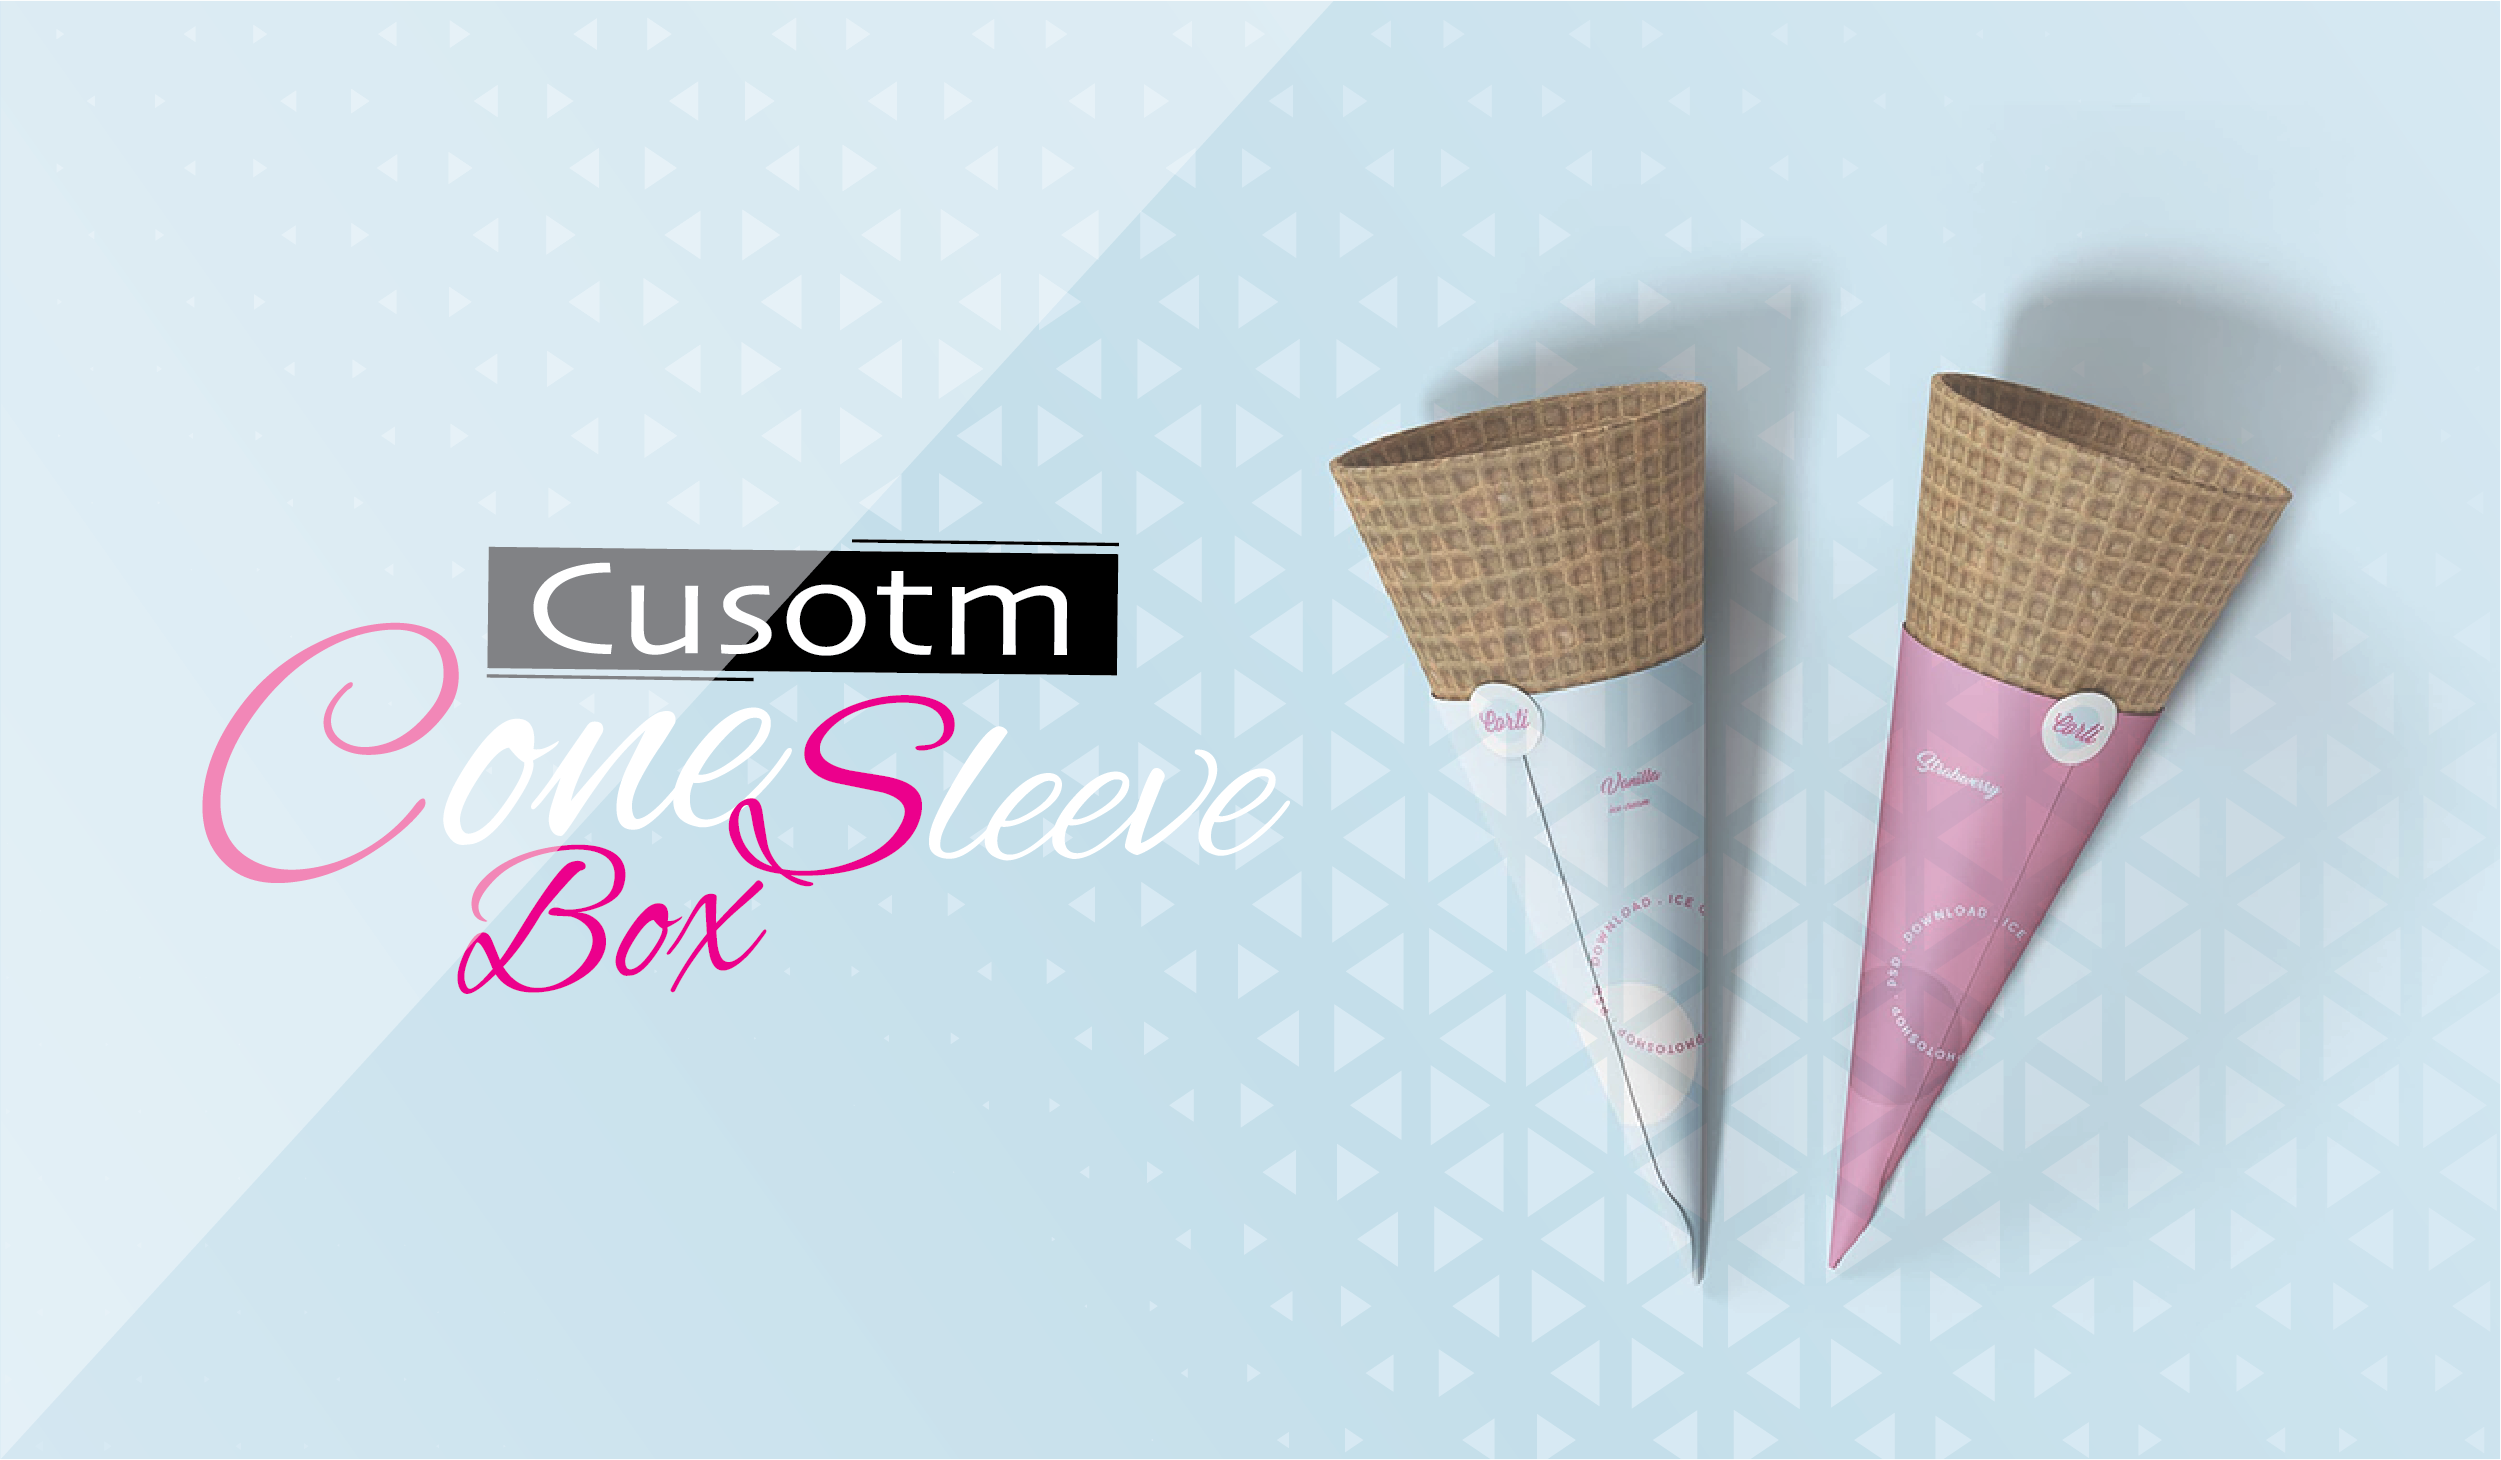 SIX WAYS TO SAVE YOUR ICE CREAMS BY USING CUSTOM CONE SLEEVES